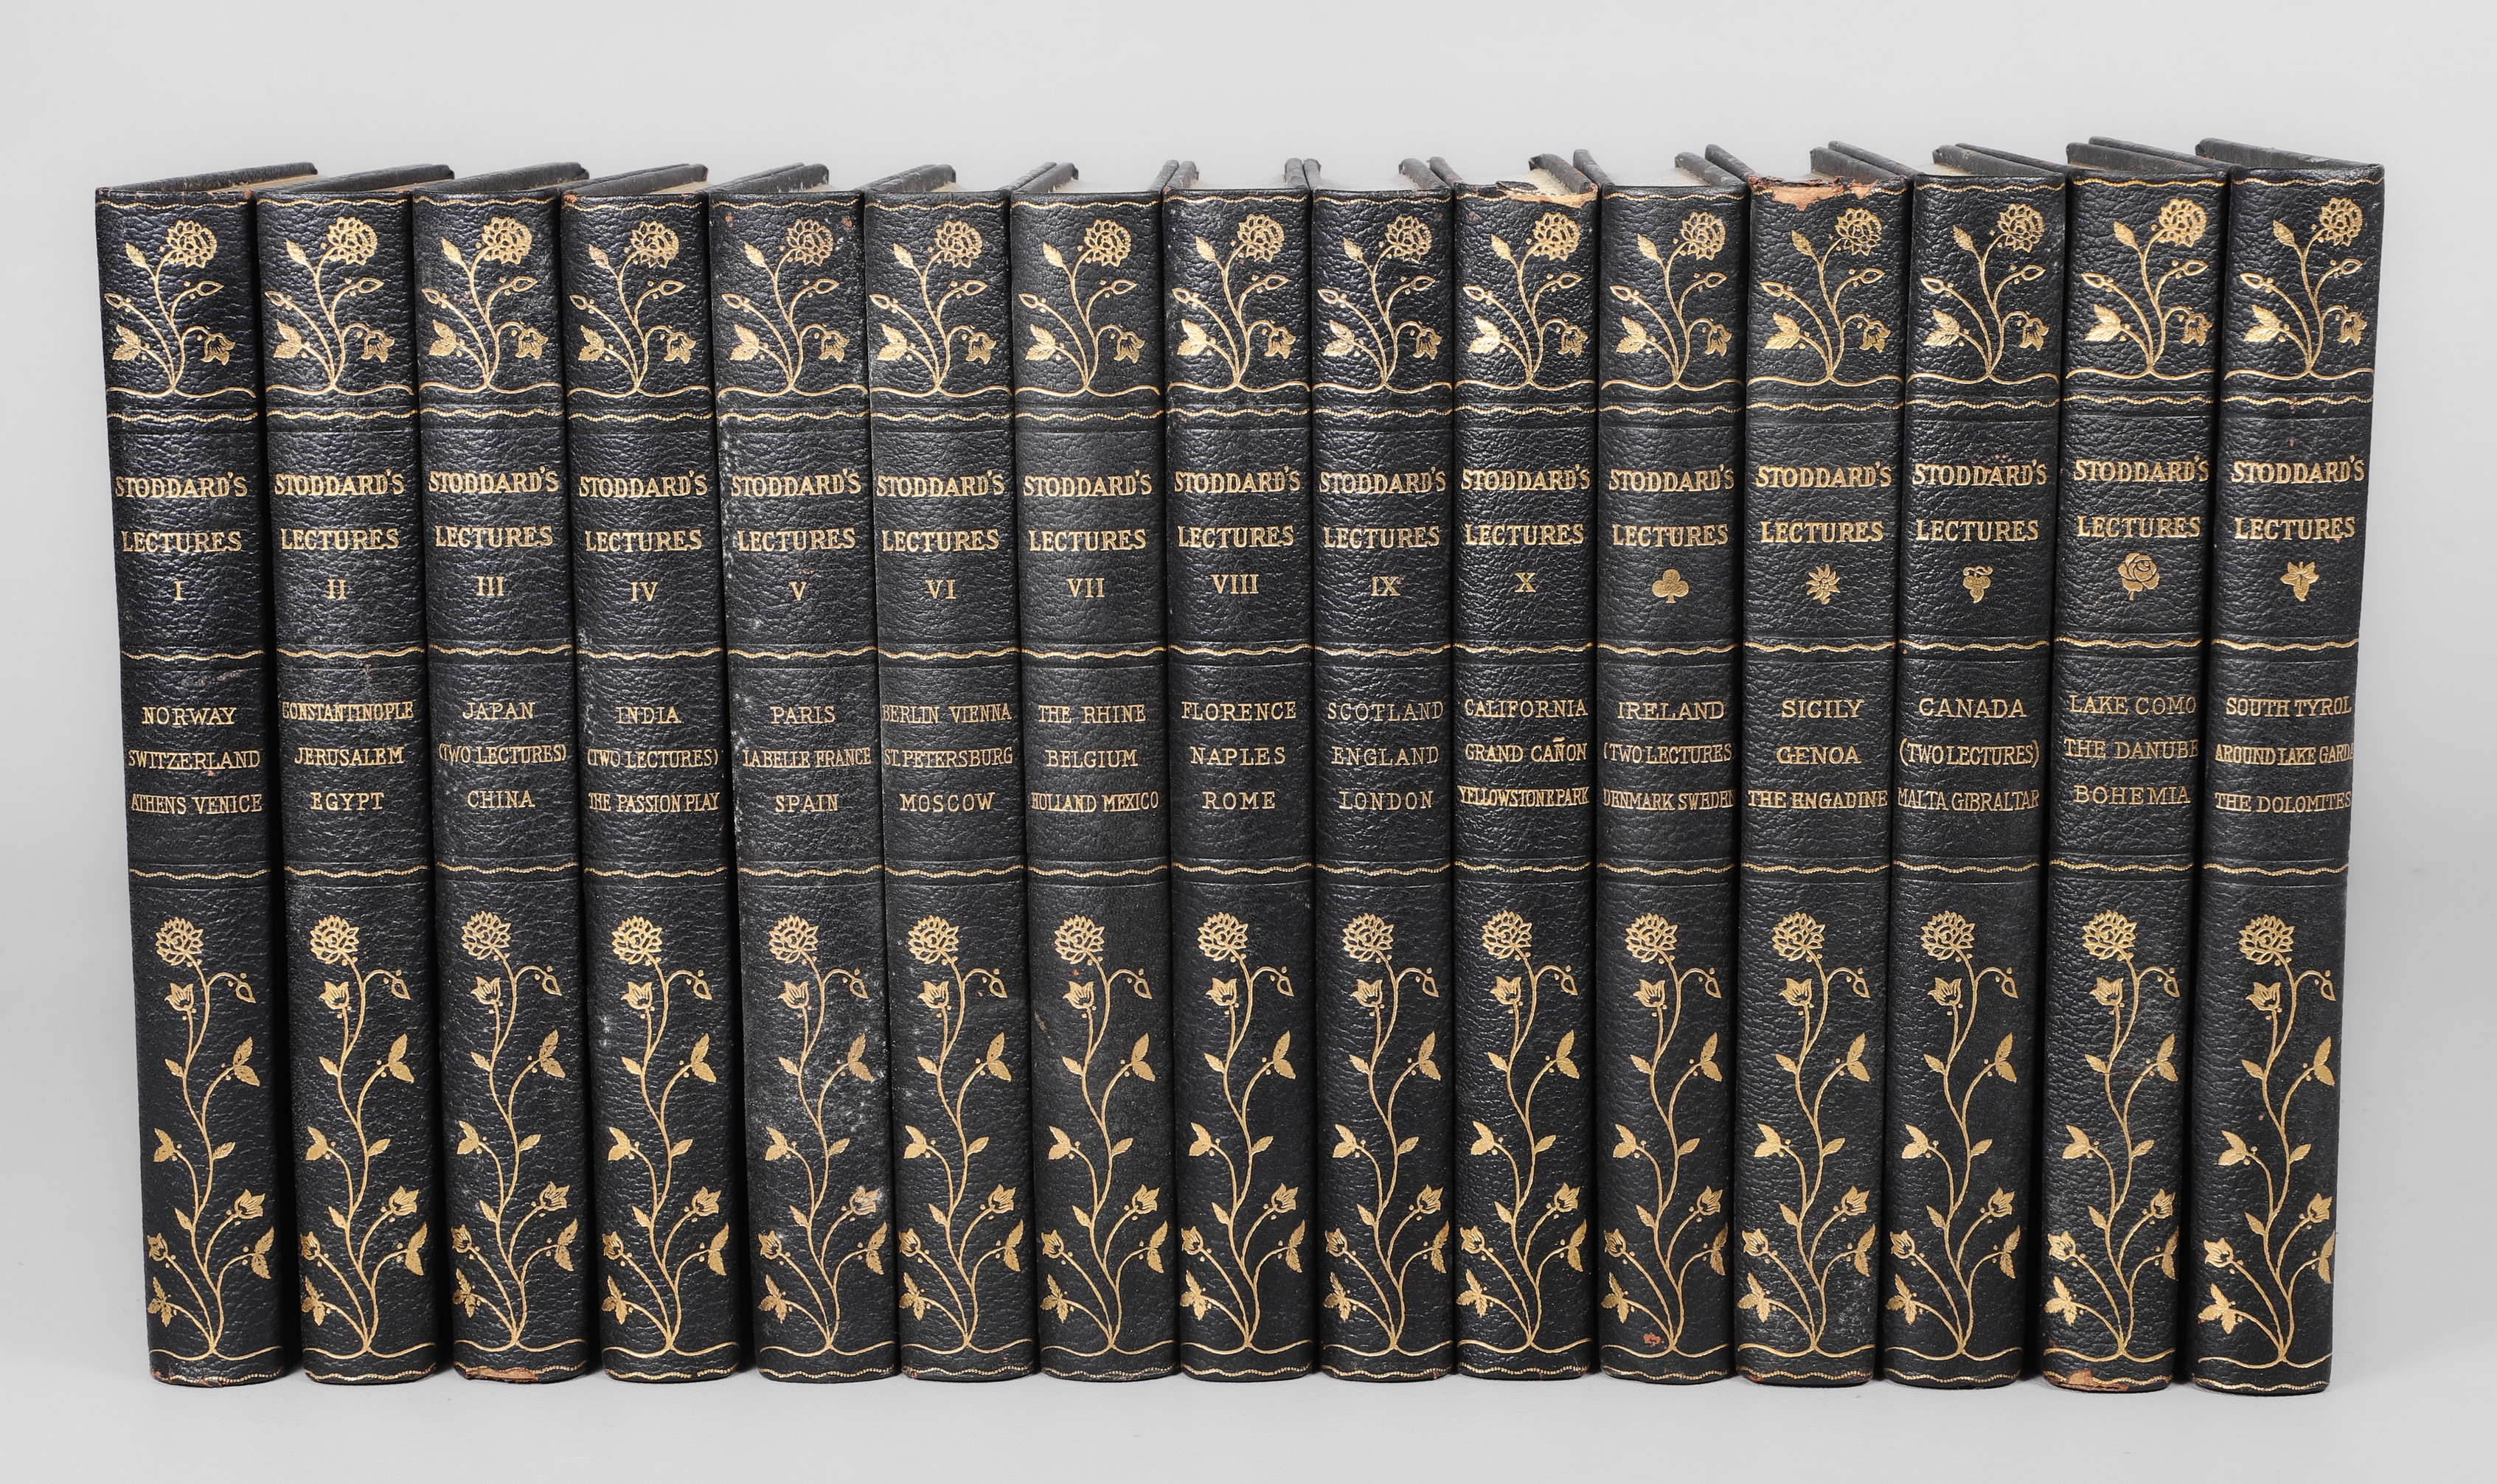 A full fifteen-volume set of the